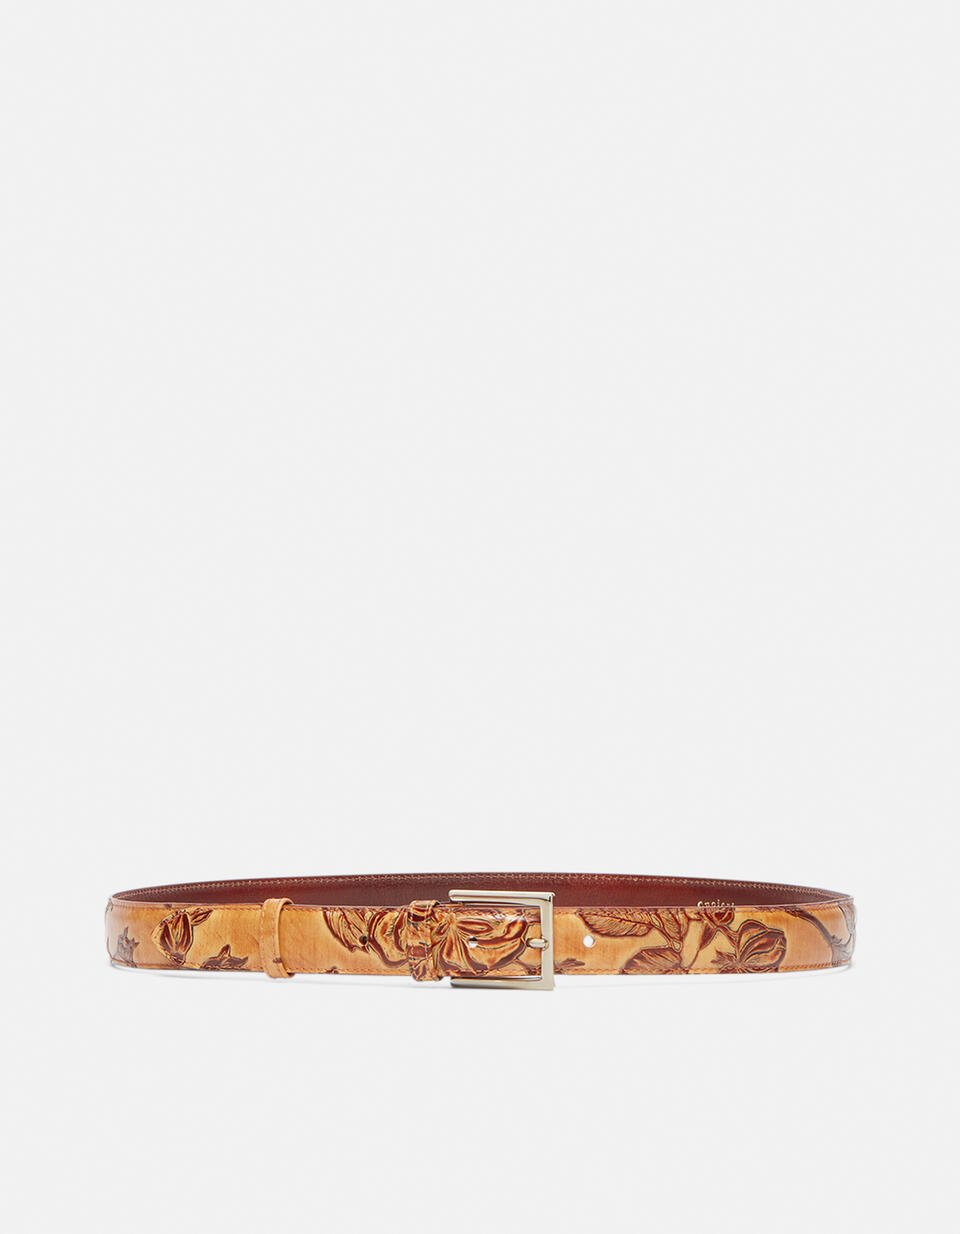 Belt in rose embossed printed leather  - Women's Belts - Belts - Cuoieria Fiorentina